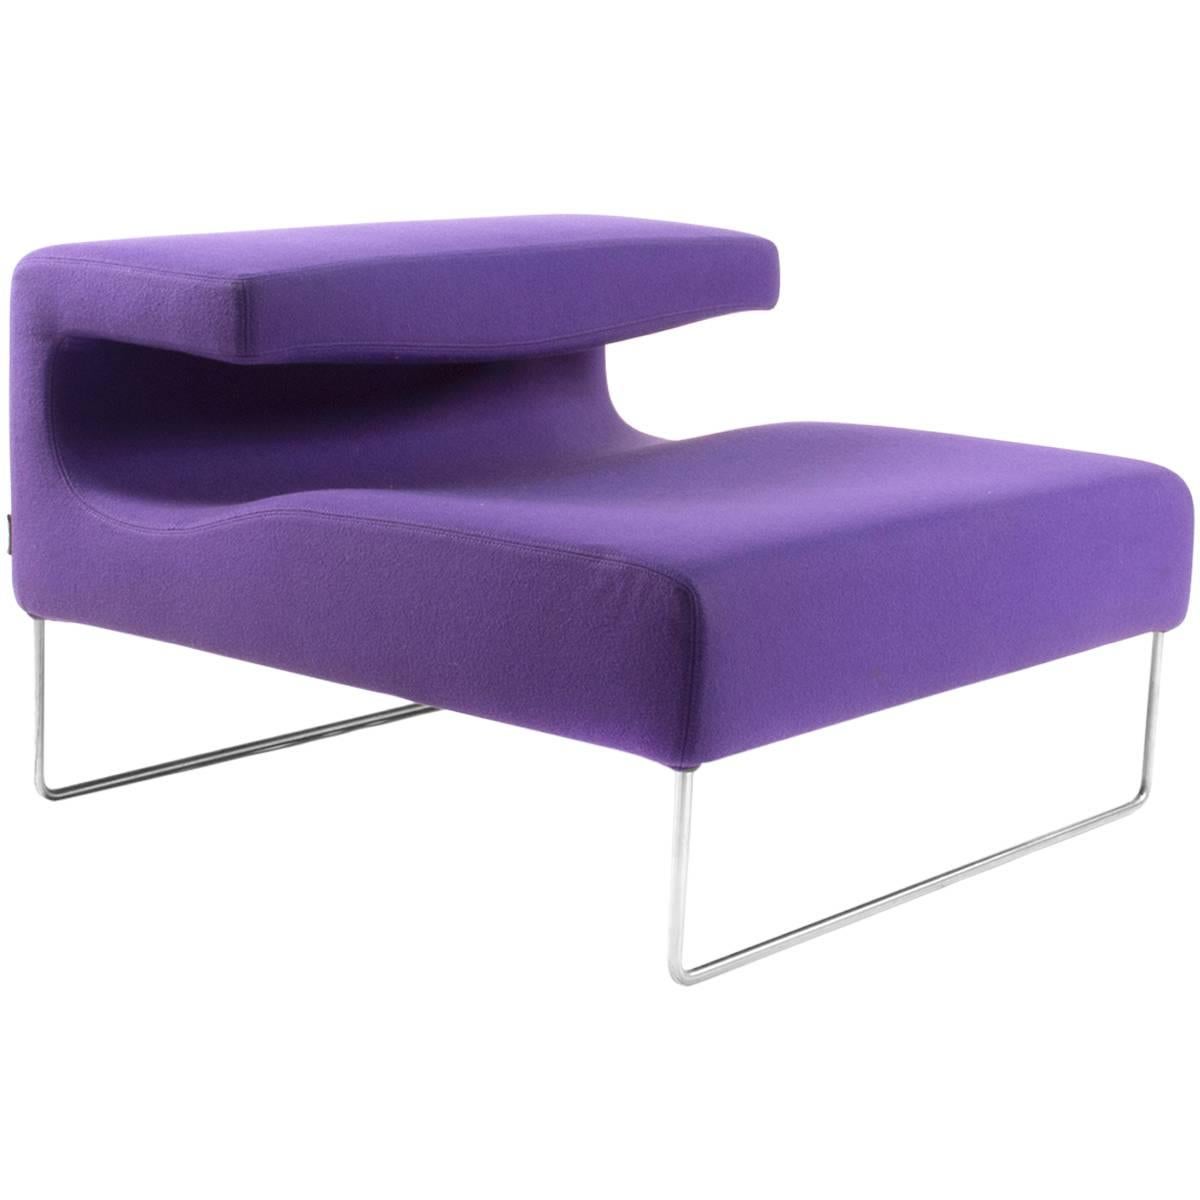 Purple Moroso Chaise Longue Lowseat Chair by Patricia Urquiola, Italy For Sale